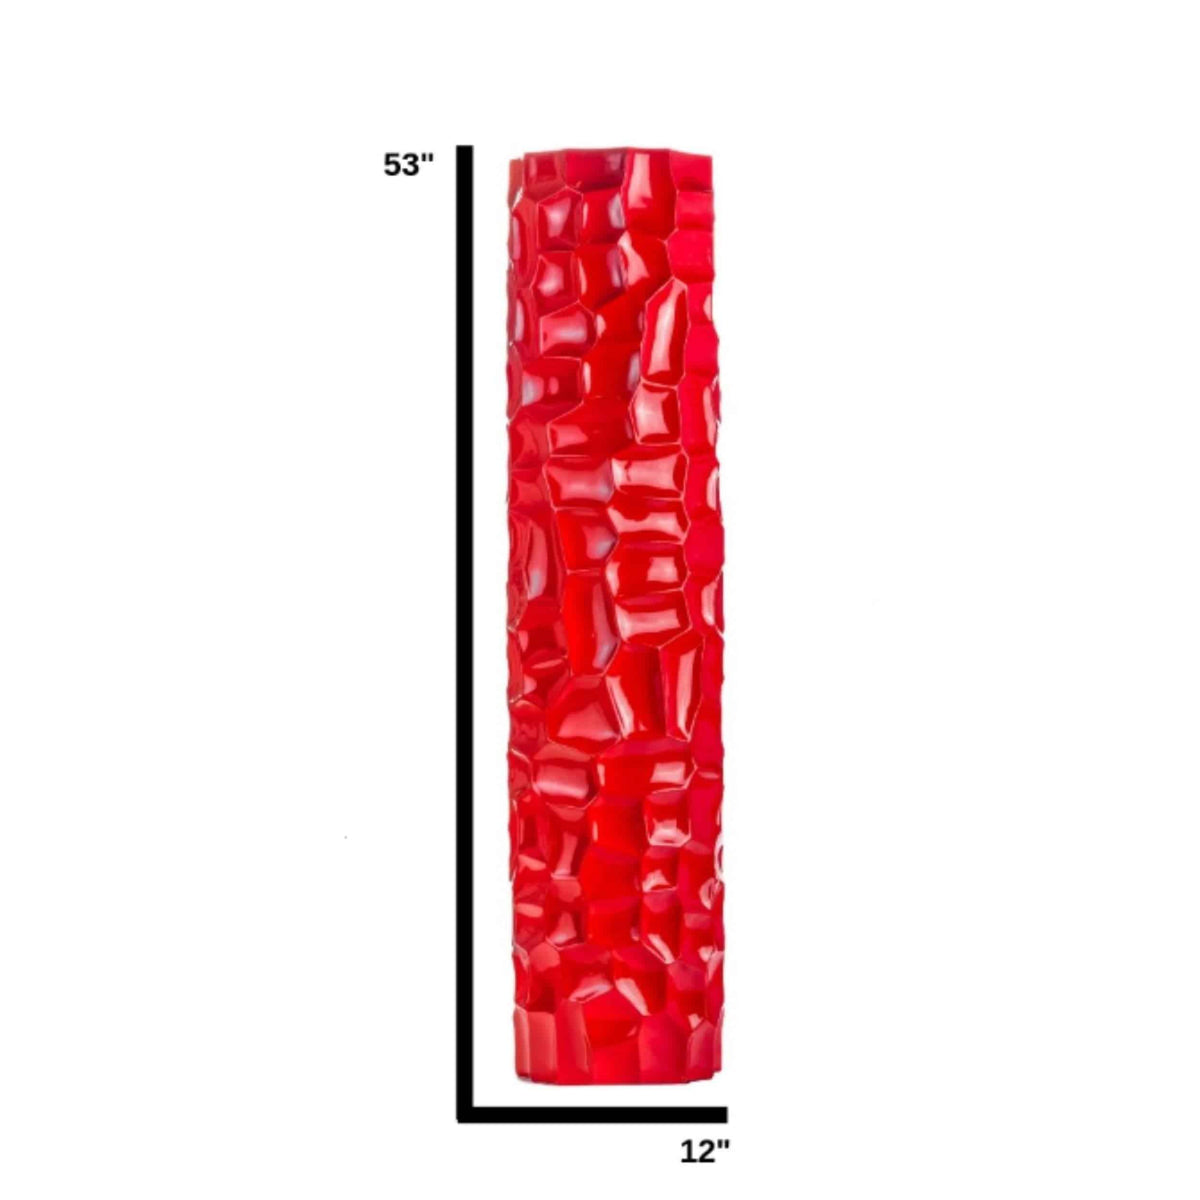 Textured 52-Inch Tall Honeycomb Vase in Red